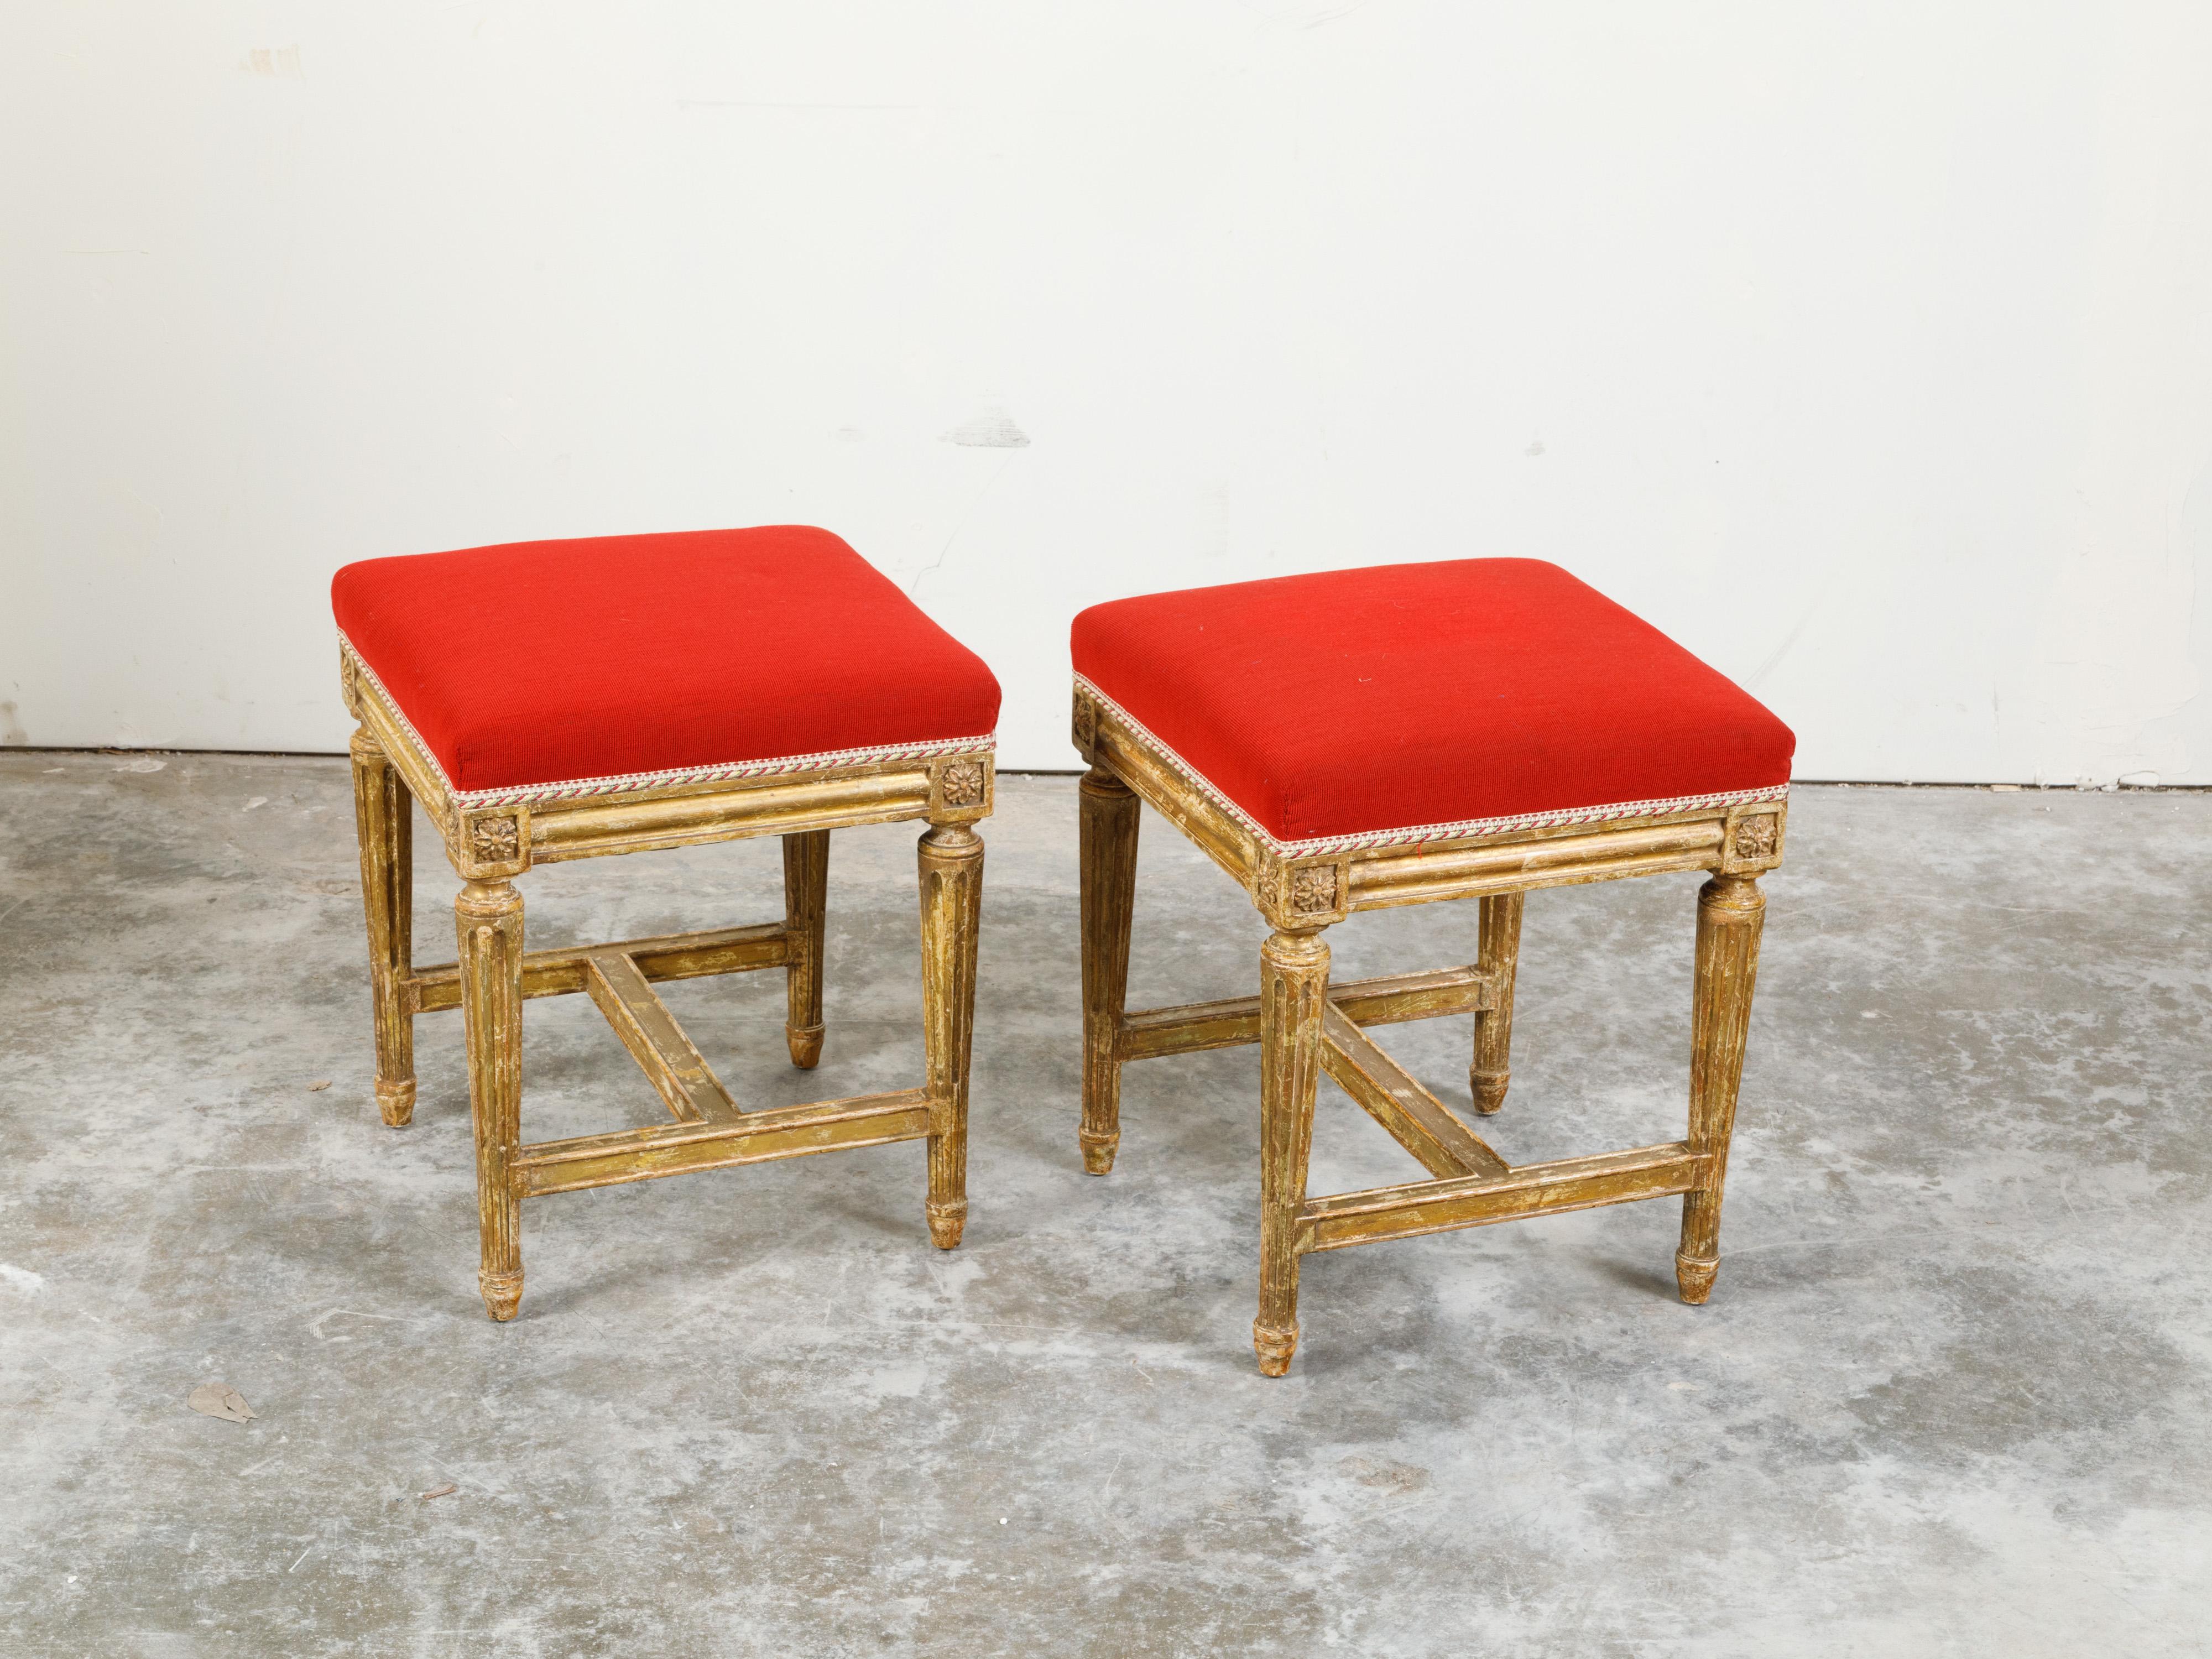 Carved Pair of Neoclassical Style 19th Century Painted Stools with Red Upholstery For Sale